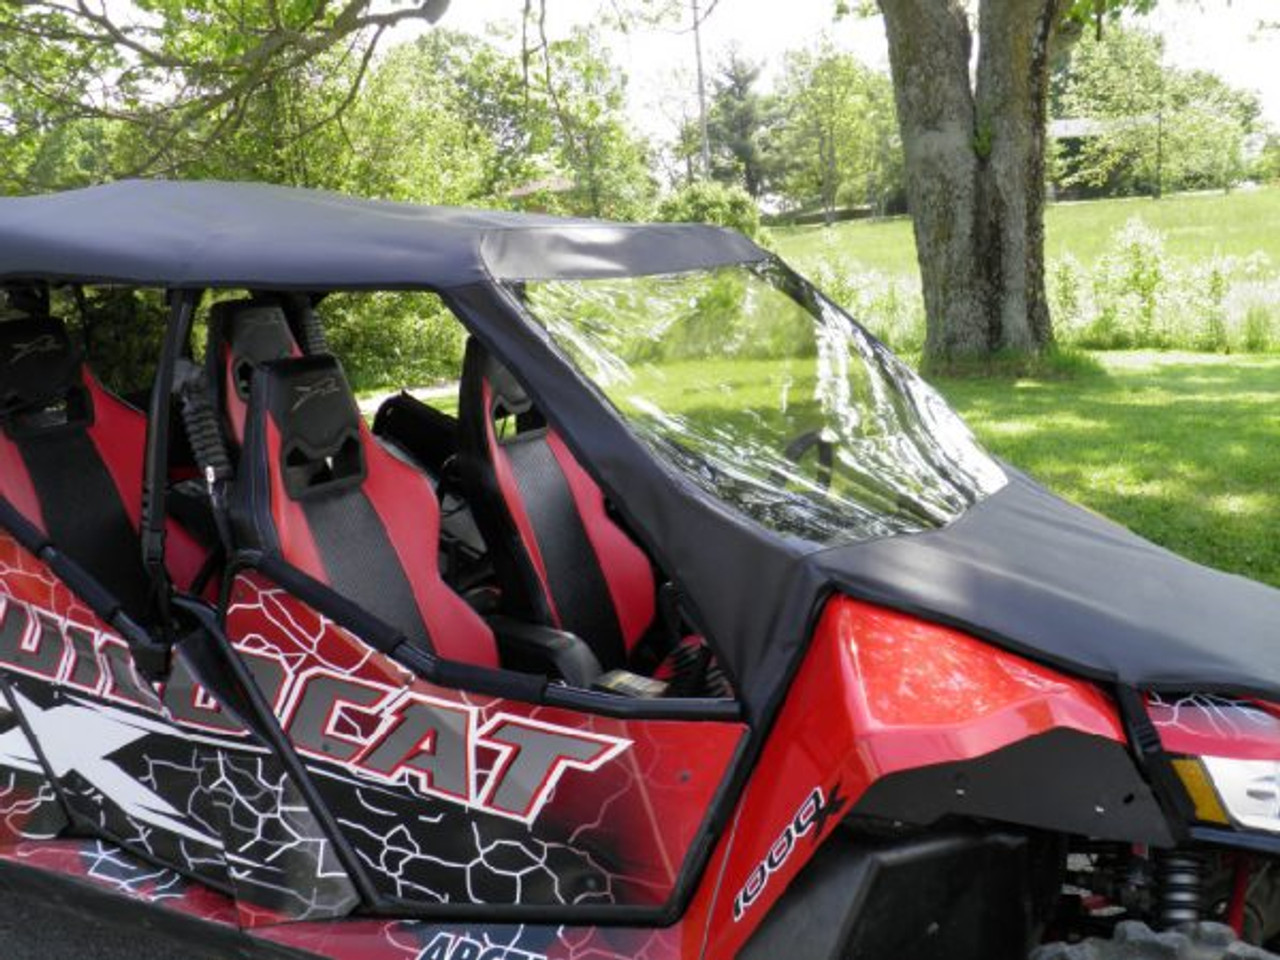 3 Star, side x side, arctic cat, wildcat 4, full cab enclosure with vinyl windshield front and side view